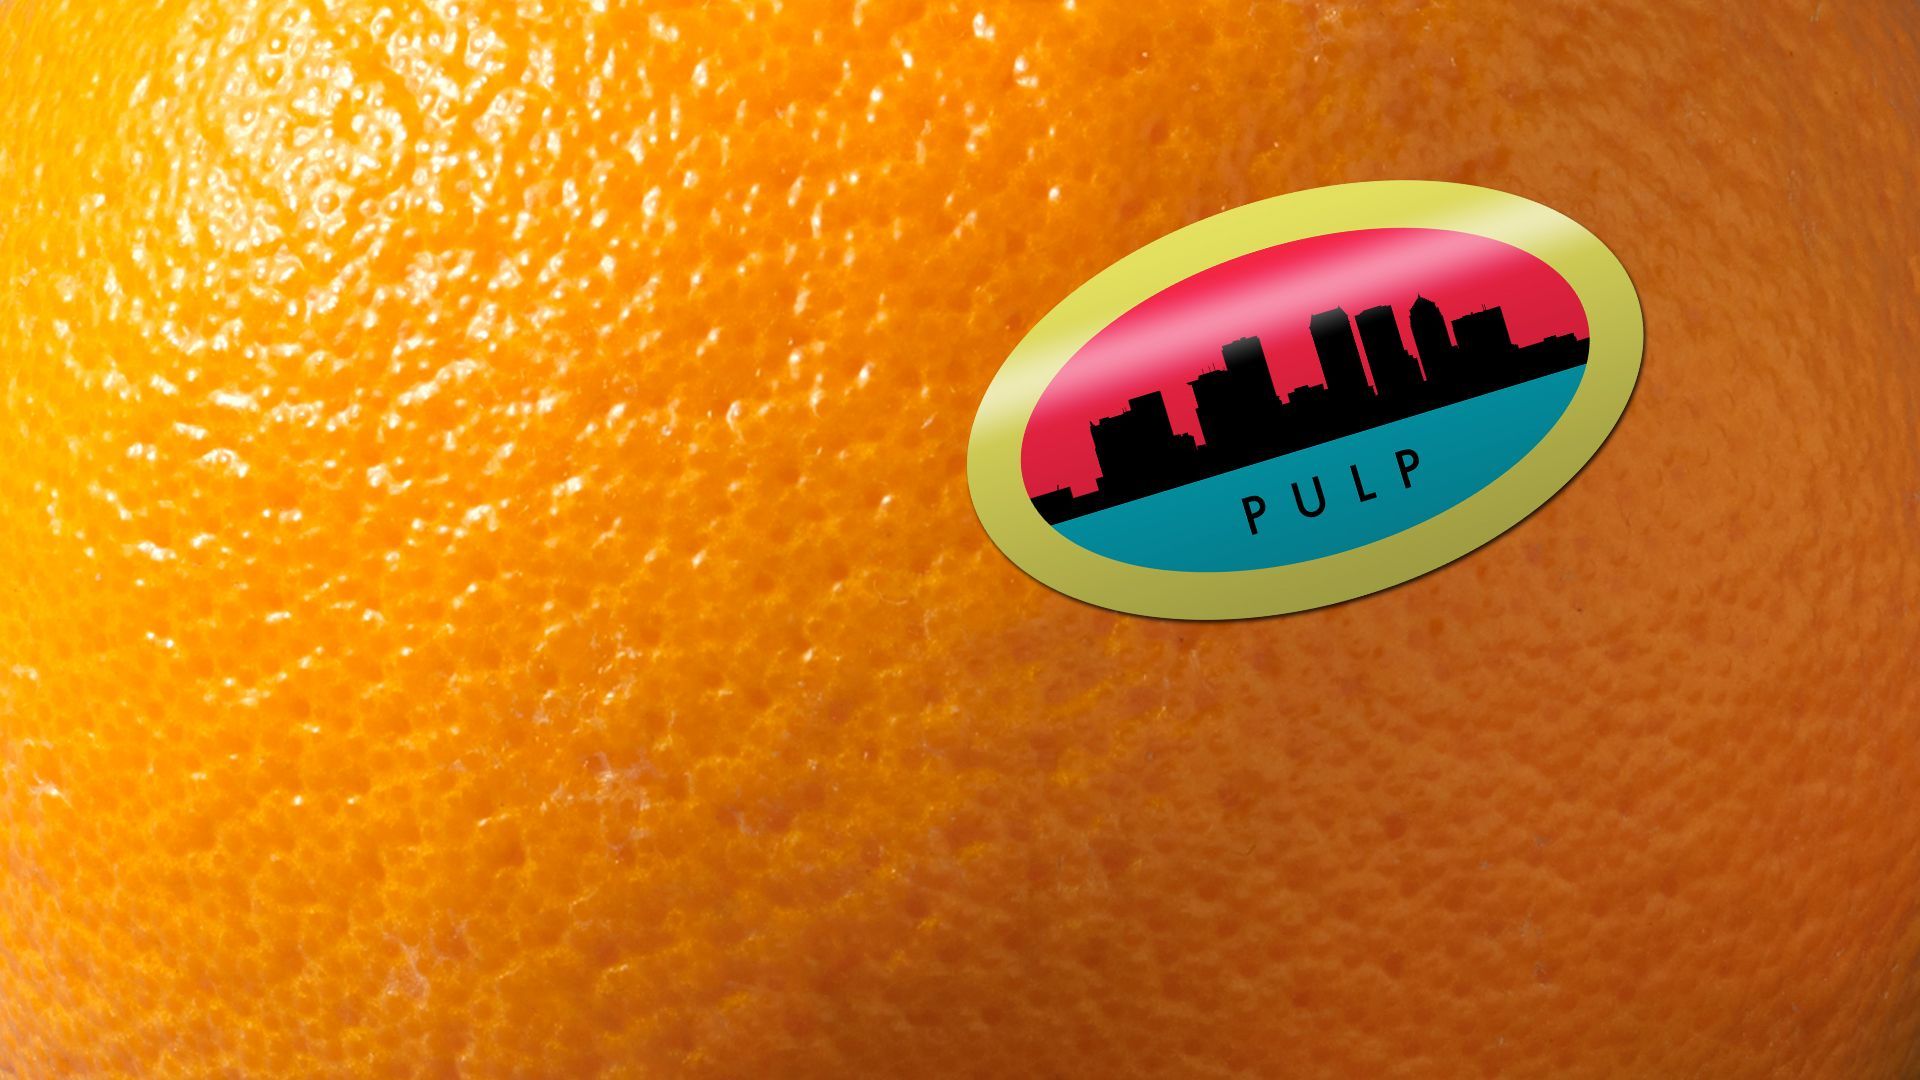 Illustration of a sticker with the Tampa skyline and the word "pulp" on it, stuck to an orange.